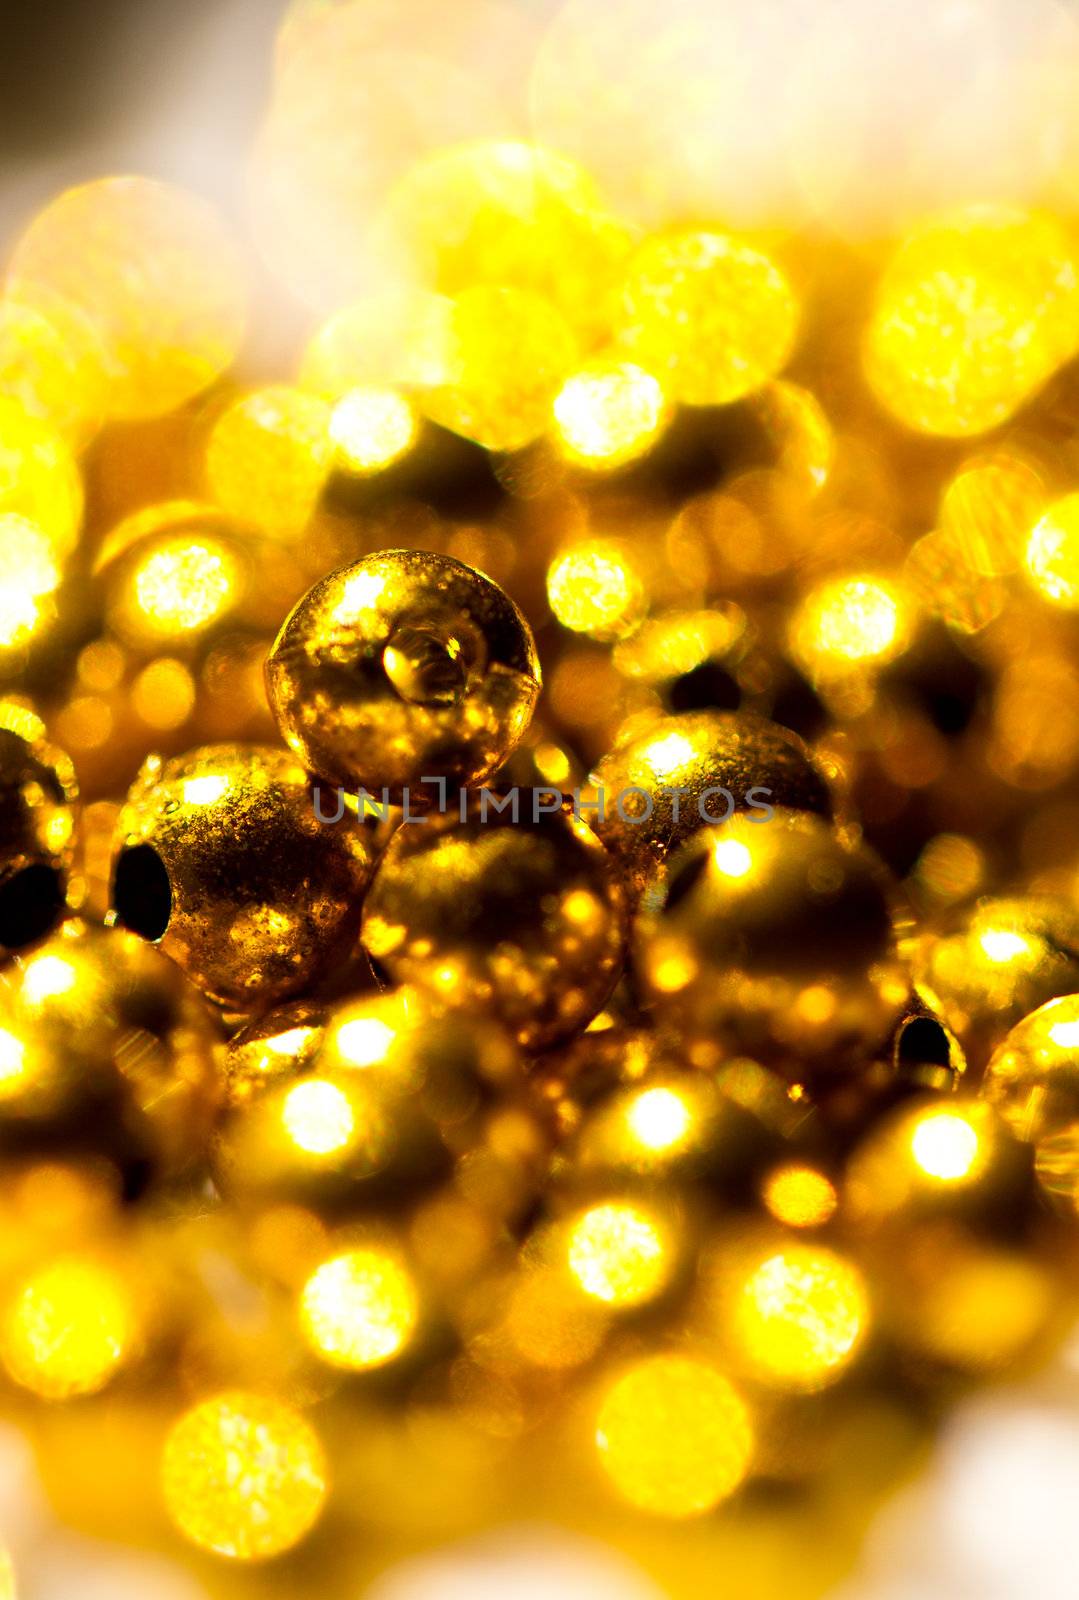 Golden colored beads shines under the sun can be use as background